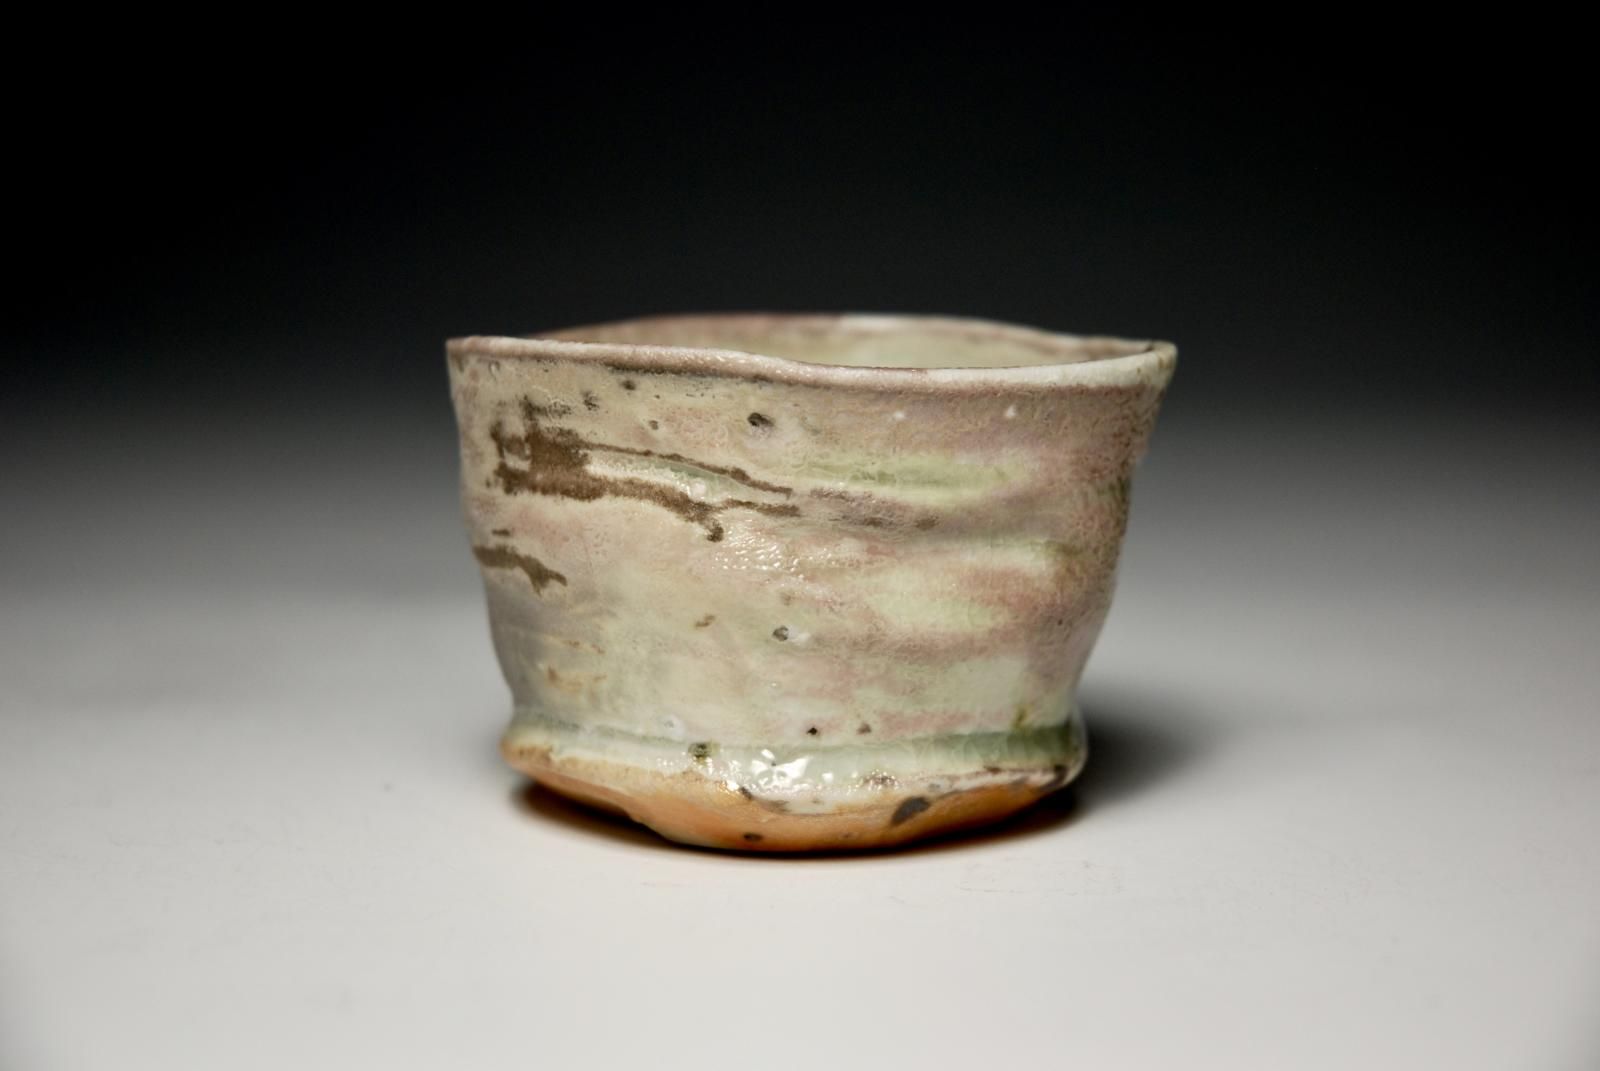 Petit Cup.  Individual Slow Thrown with Hand Trimmed Foot.  Porcelain Body with Locally Sourced Indigenous Rock Grits.  Celadon Glaze. by Sim Taylor